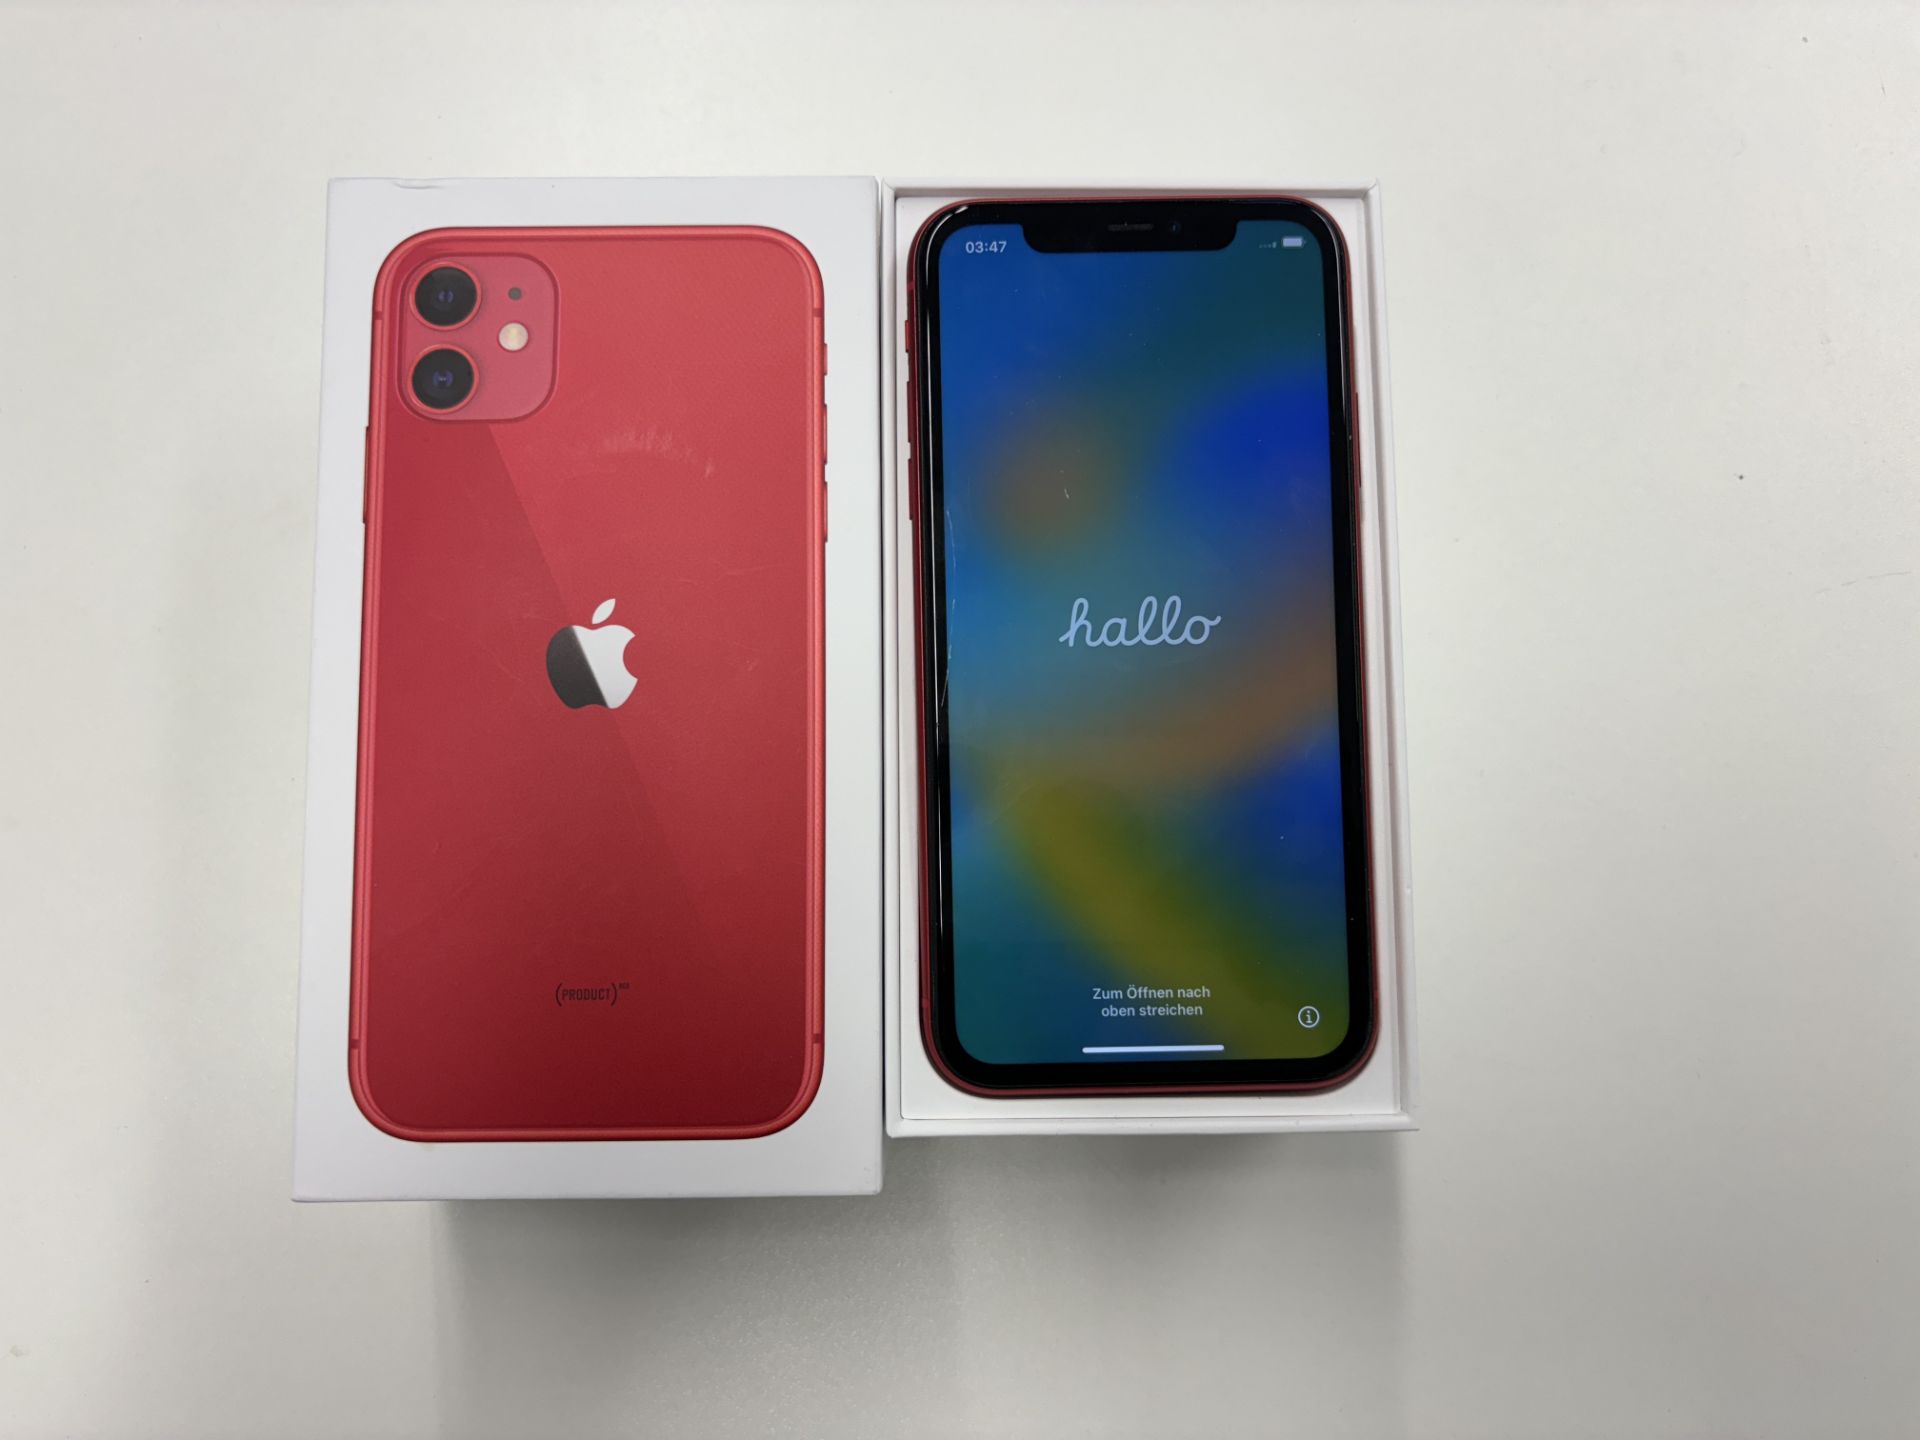 Apple iPhone 11, 128GB, red, model A2221, comes with original box with unused headphones, charger